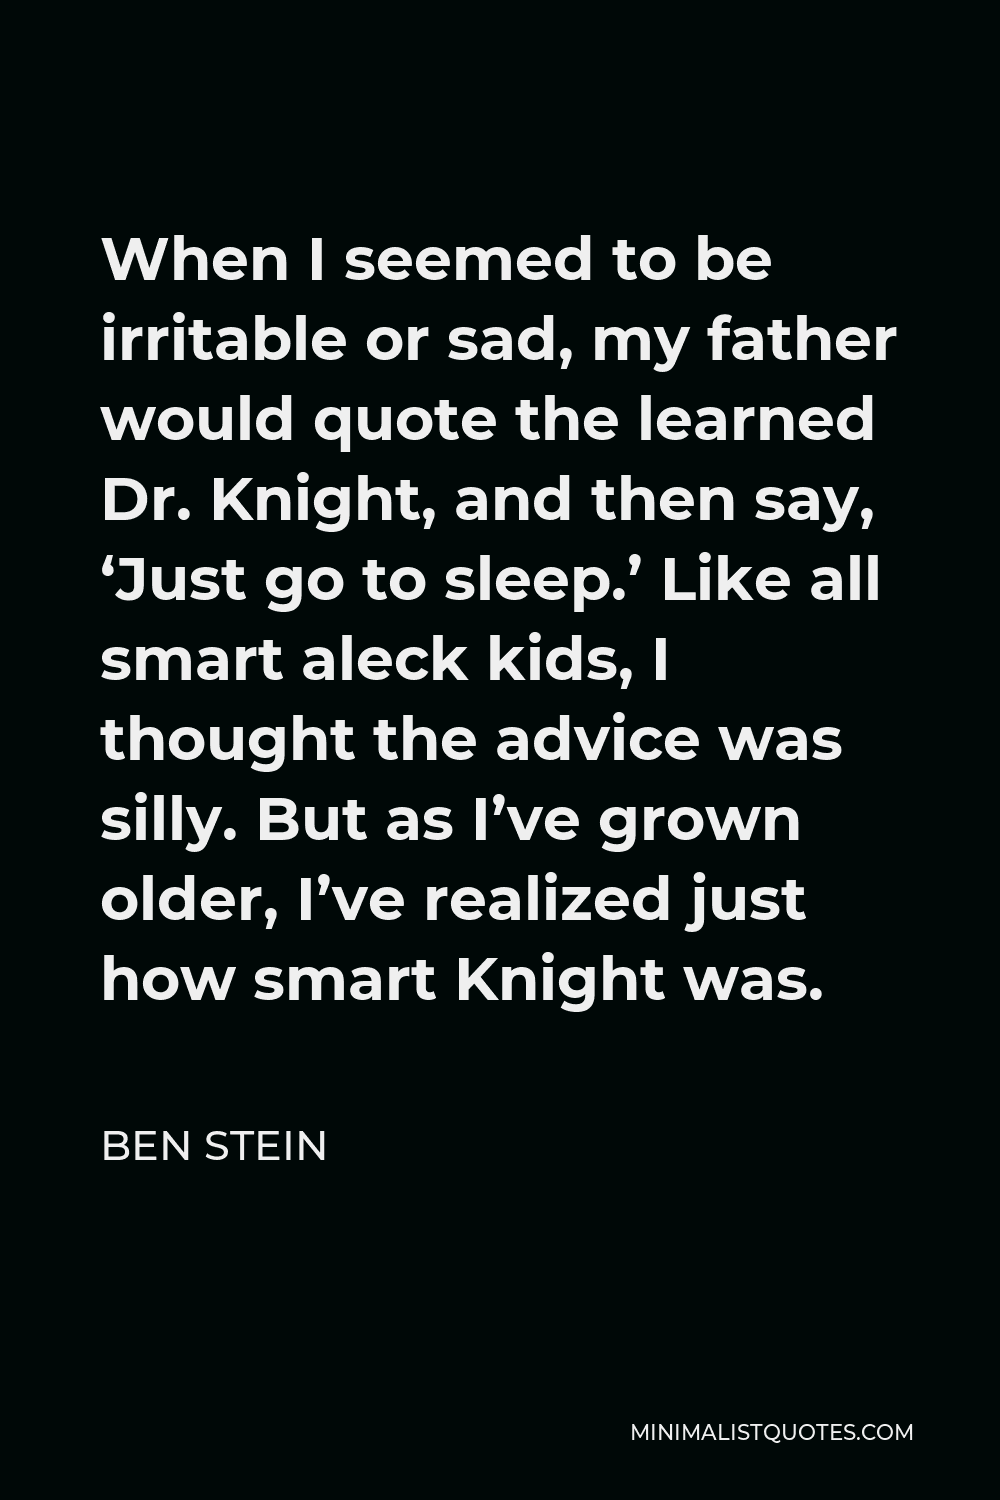 Ben Stein Quote - When I seemed to be irritable or sad, my father would quote the learned Dr. Knight, and then say, ‘Just go to sleep.’ Like all smart aleck kids, I thought the advice was silly. But as I’ve grown older, I’ve realized just how smart Knight was.